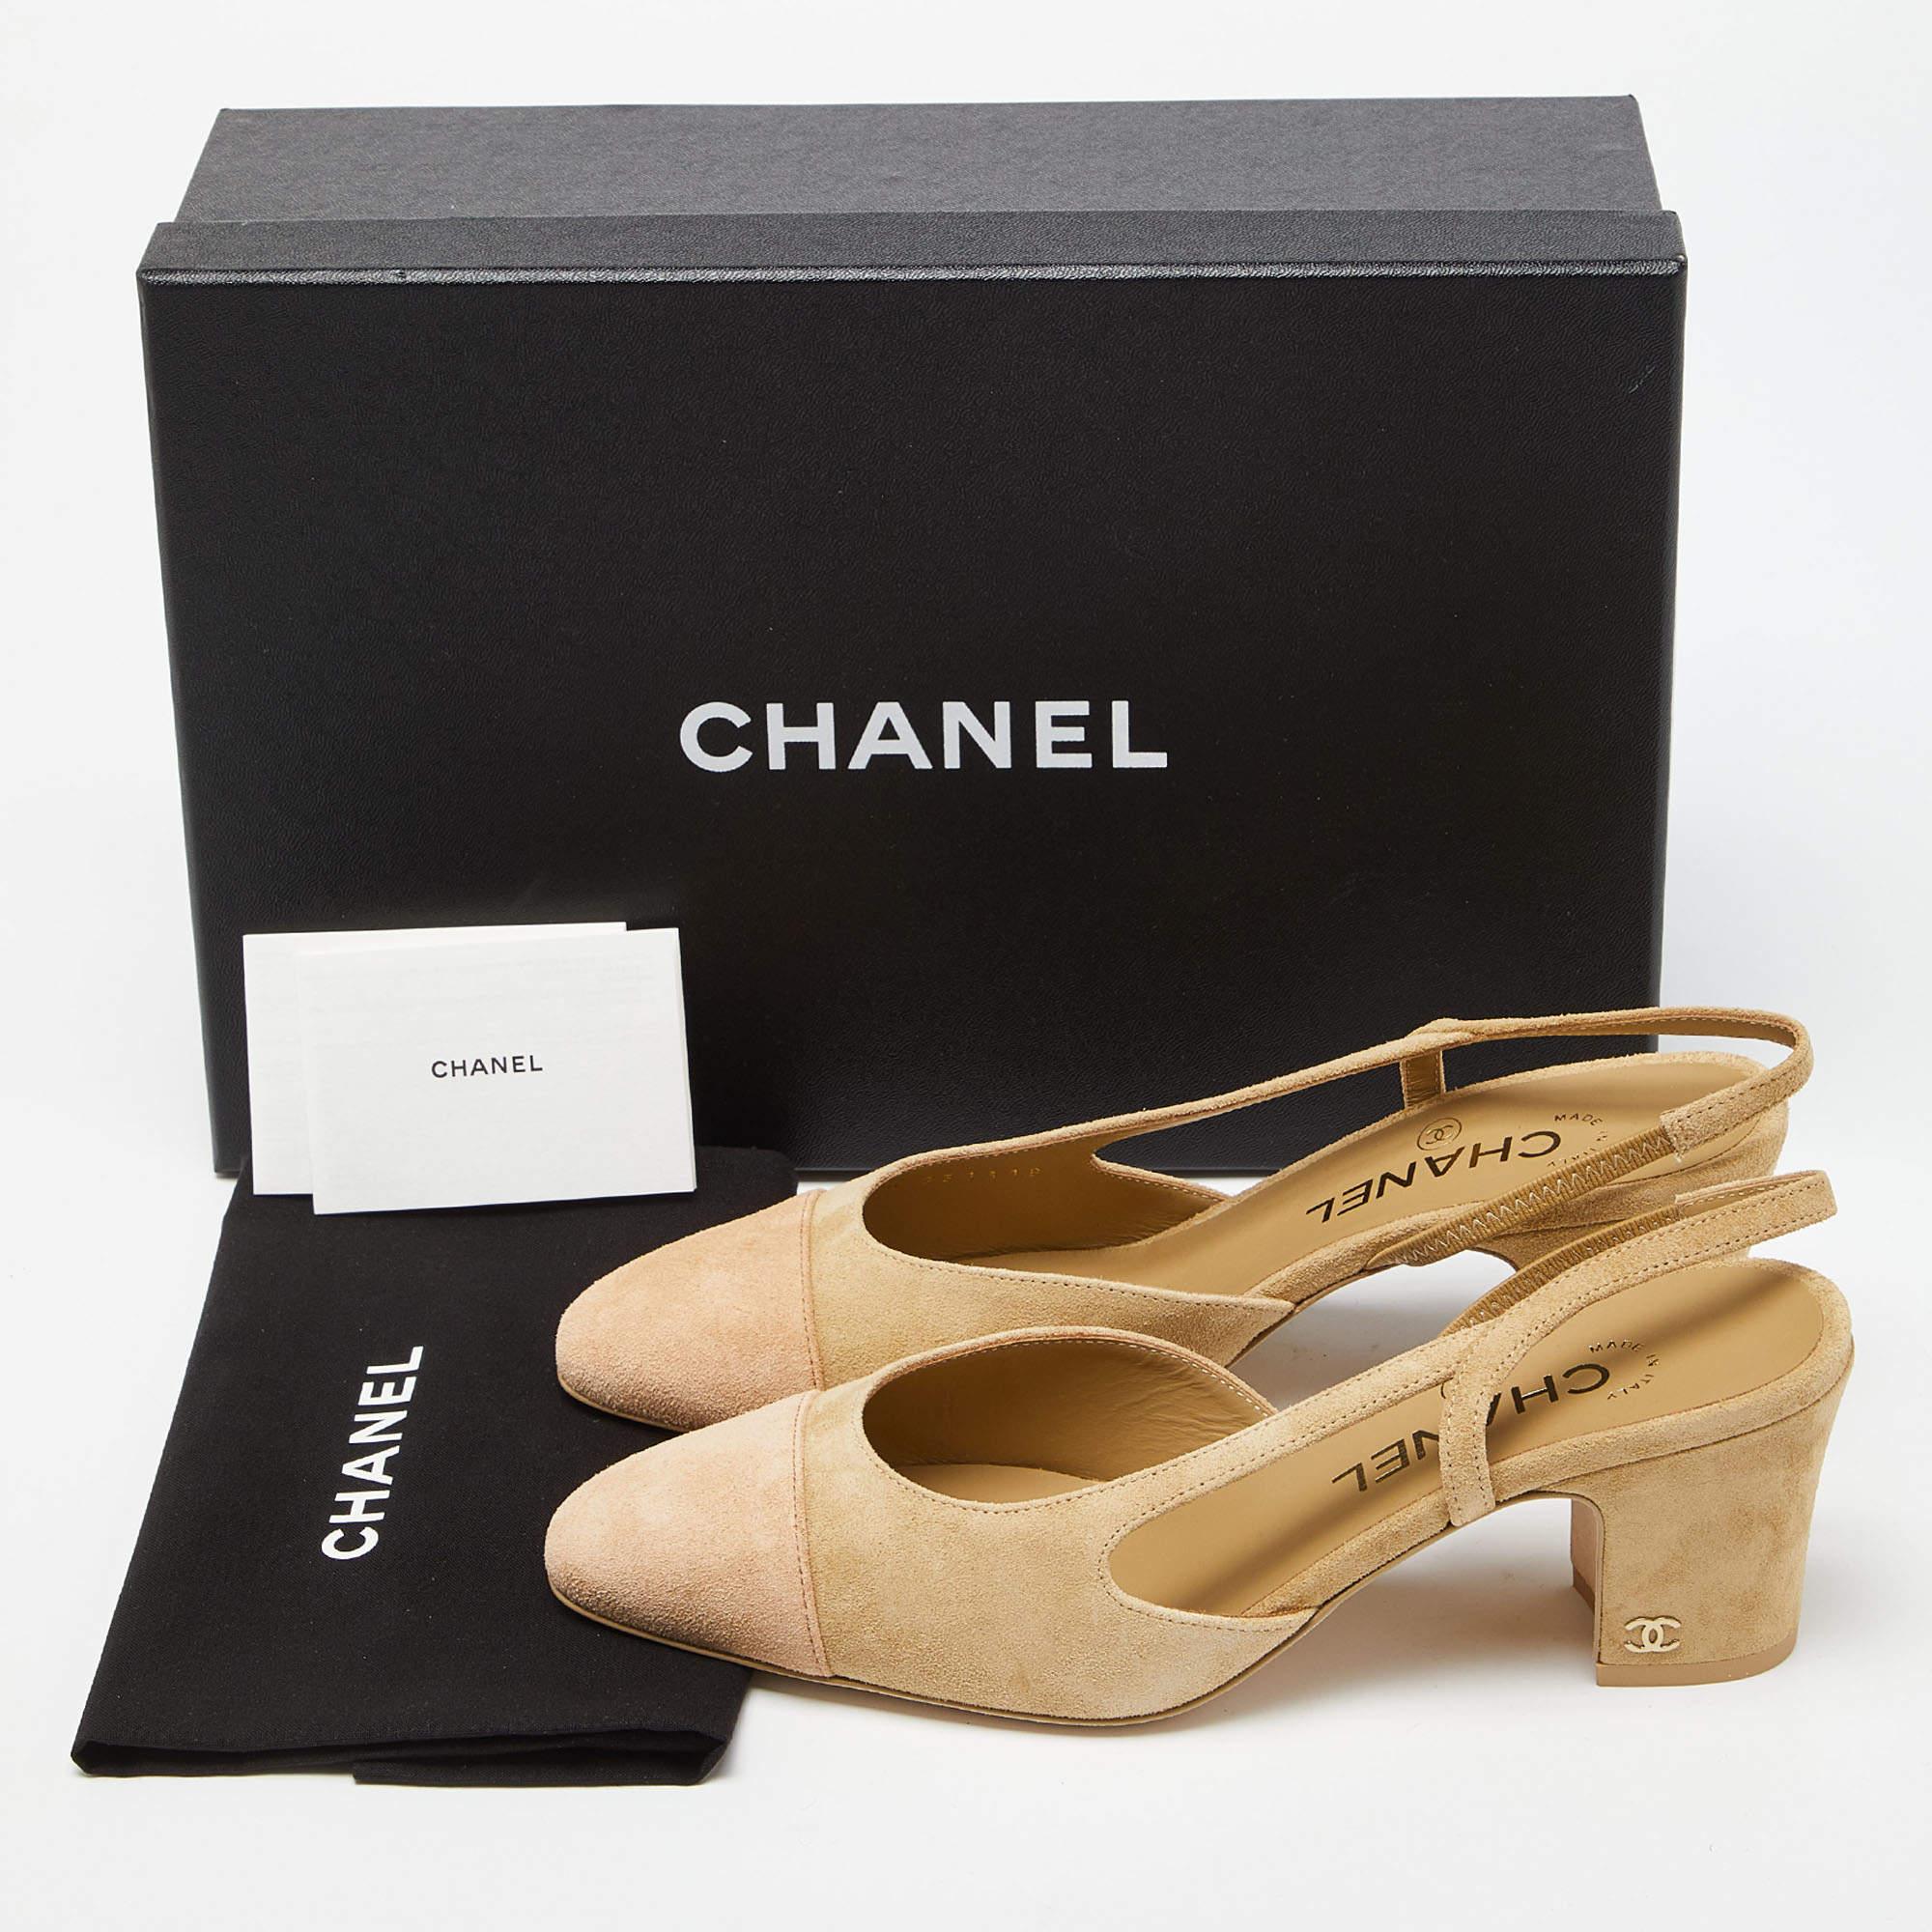 Chanel Two Tone Beige Cap Toe Suede Slingback Sandals Size 37.5 5